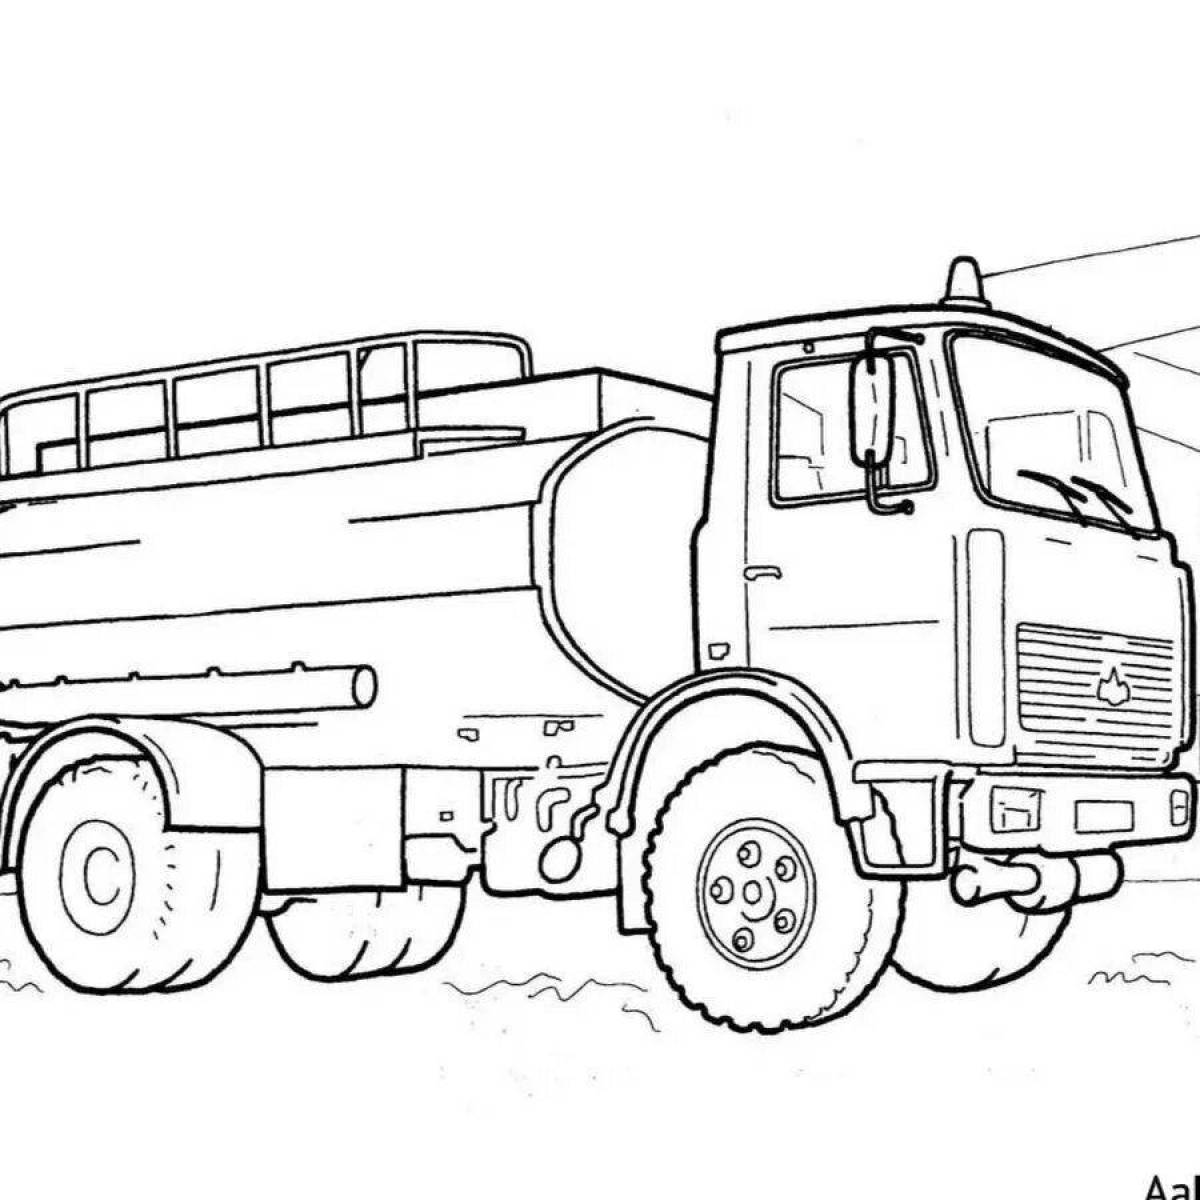 Fancy fire truck coloring page